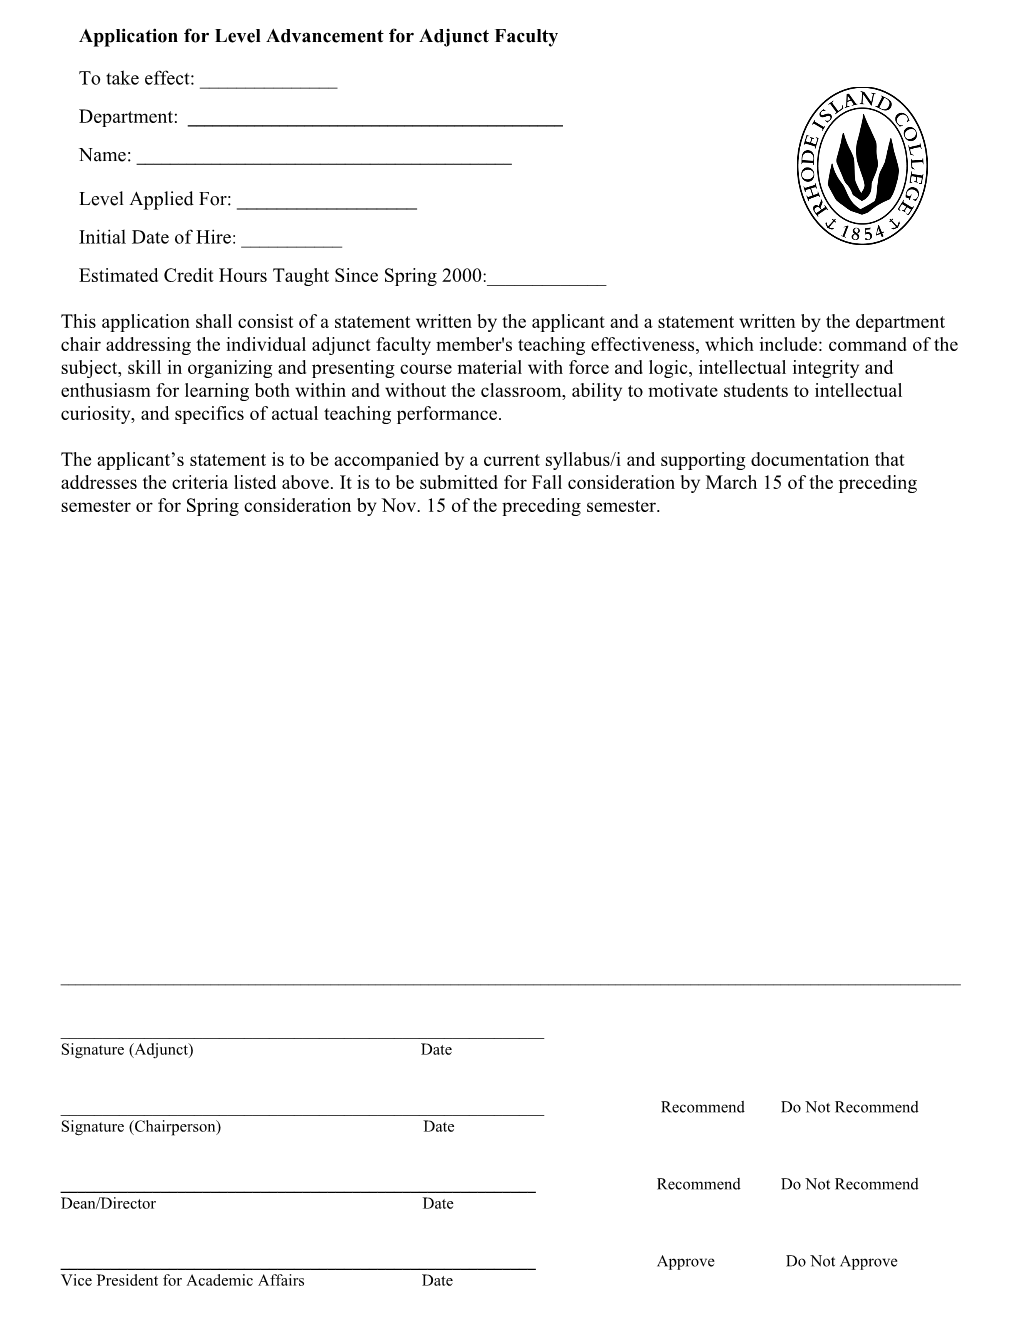 Annual Faculty Evaluation and Recommendation Form